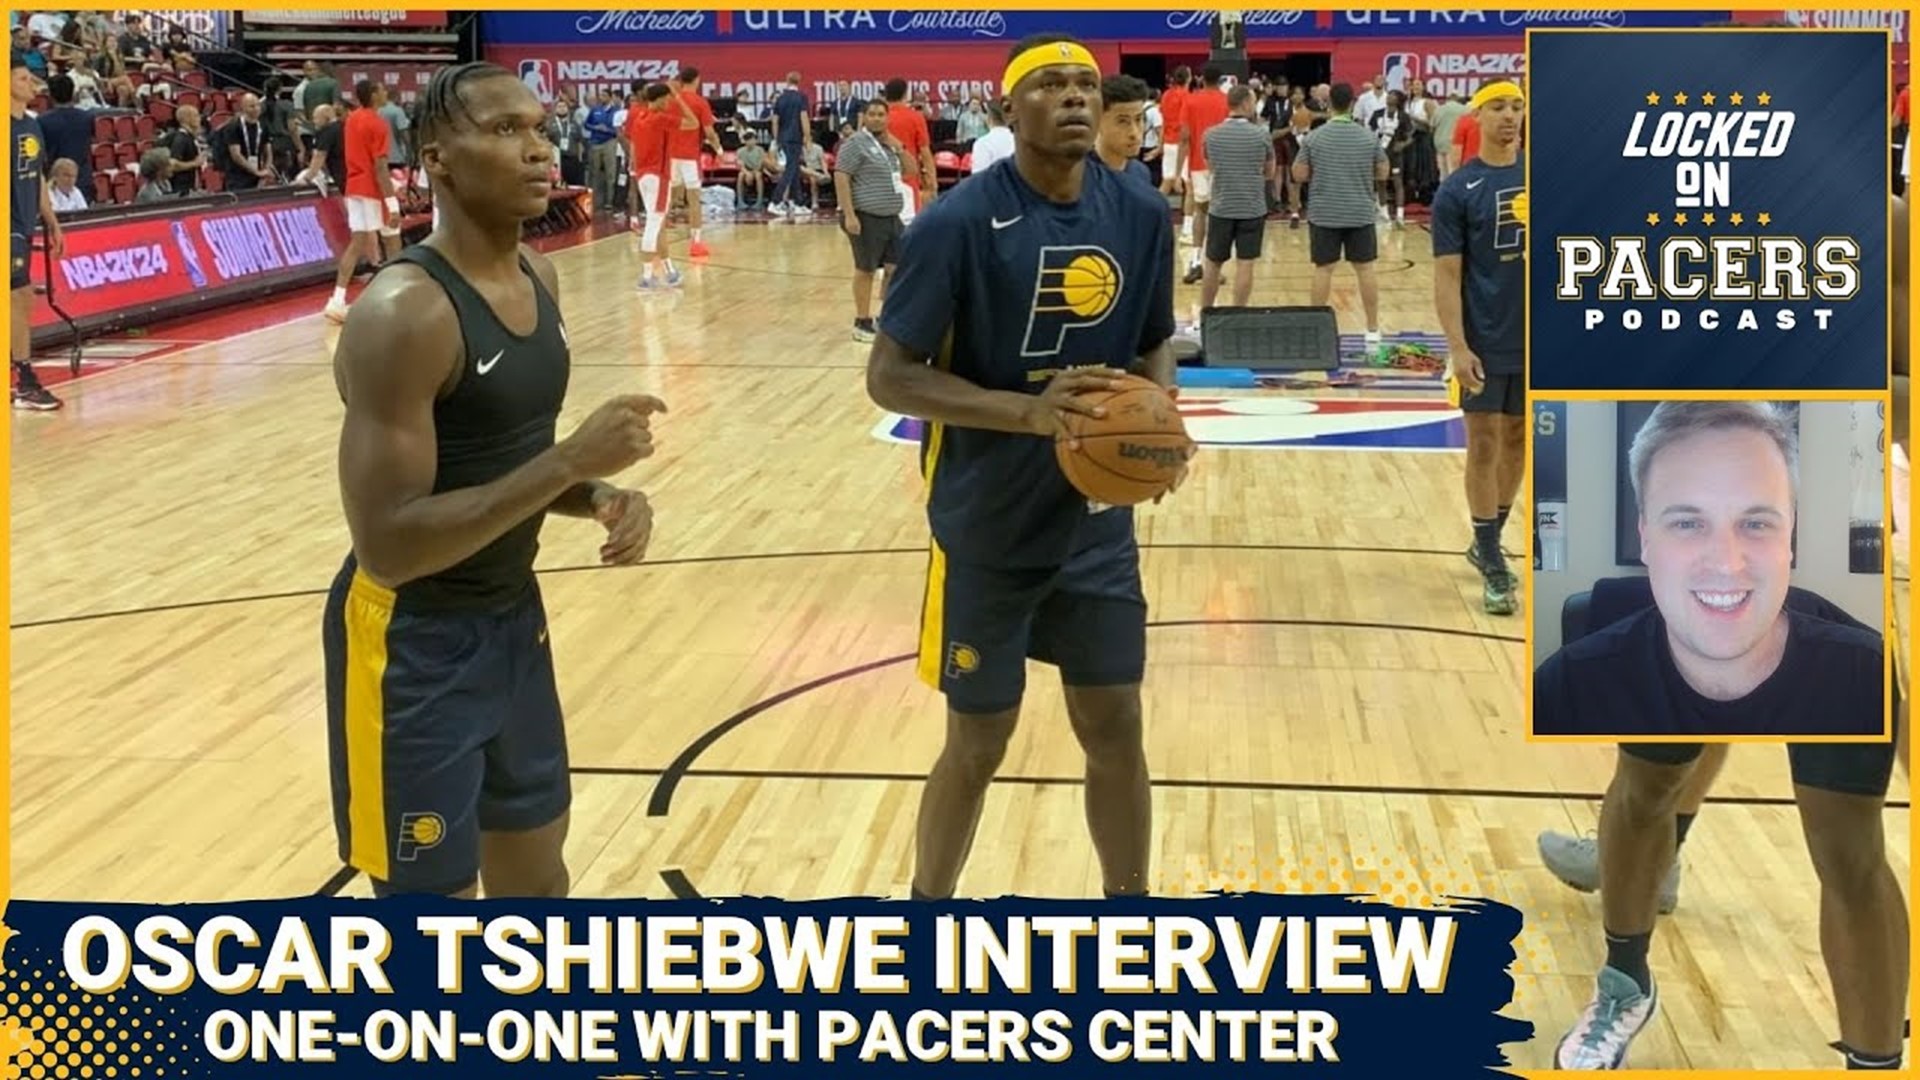 Indiana Pacers center Oscar Tshiebwe joins Locked On Pacers